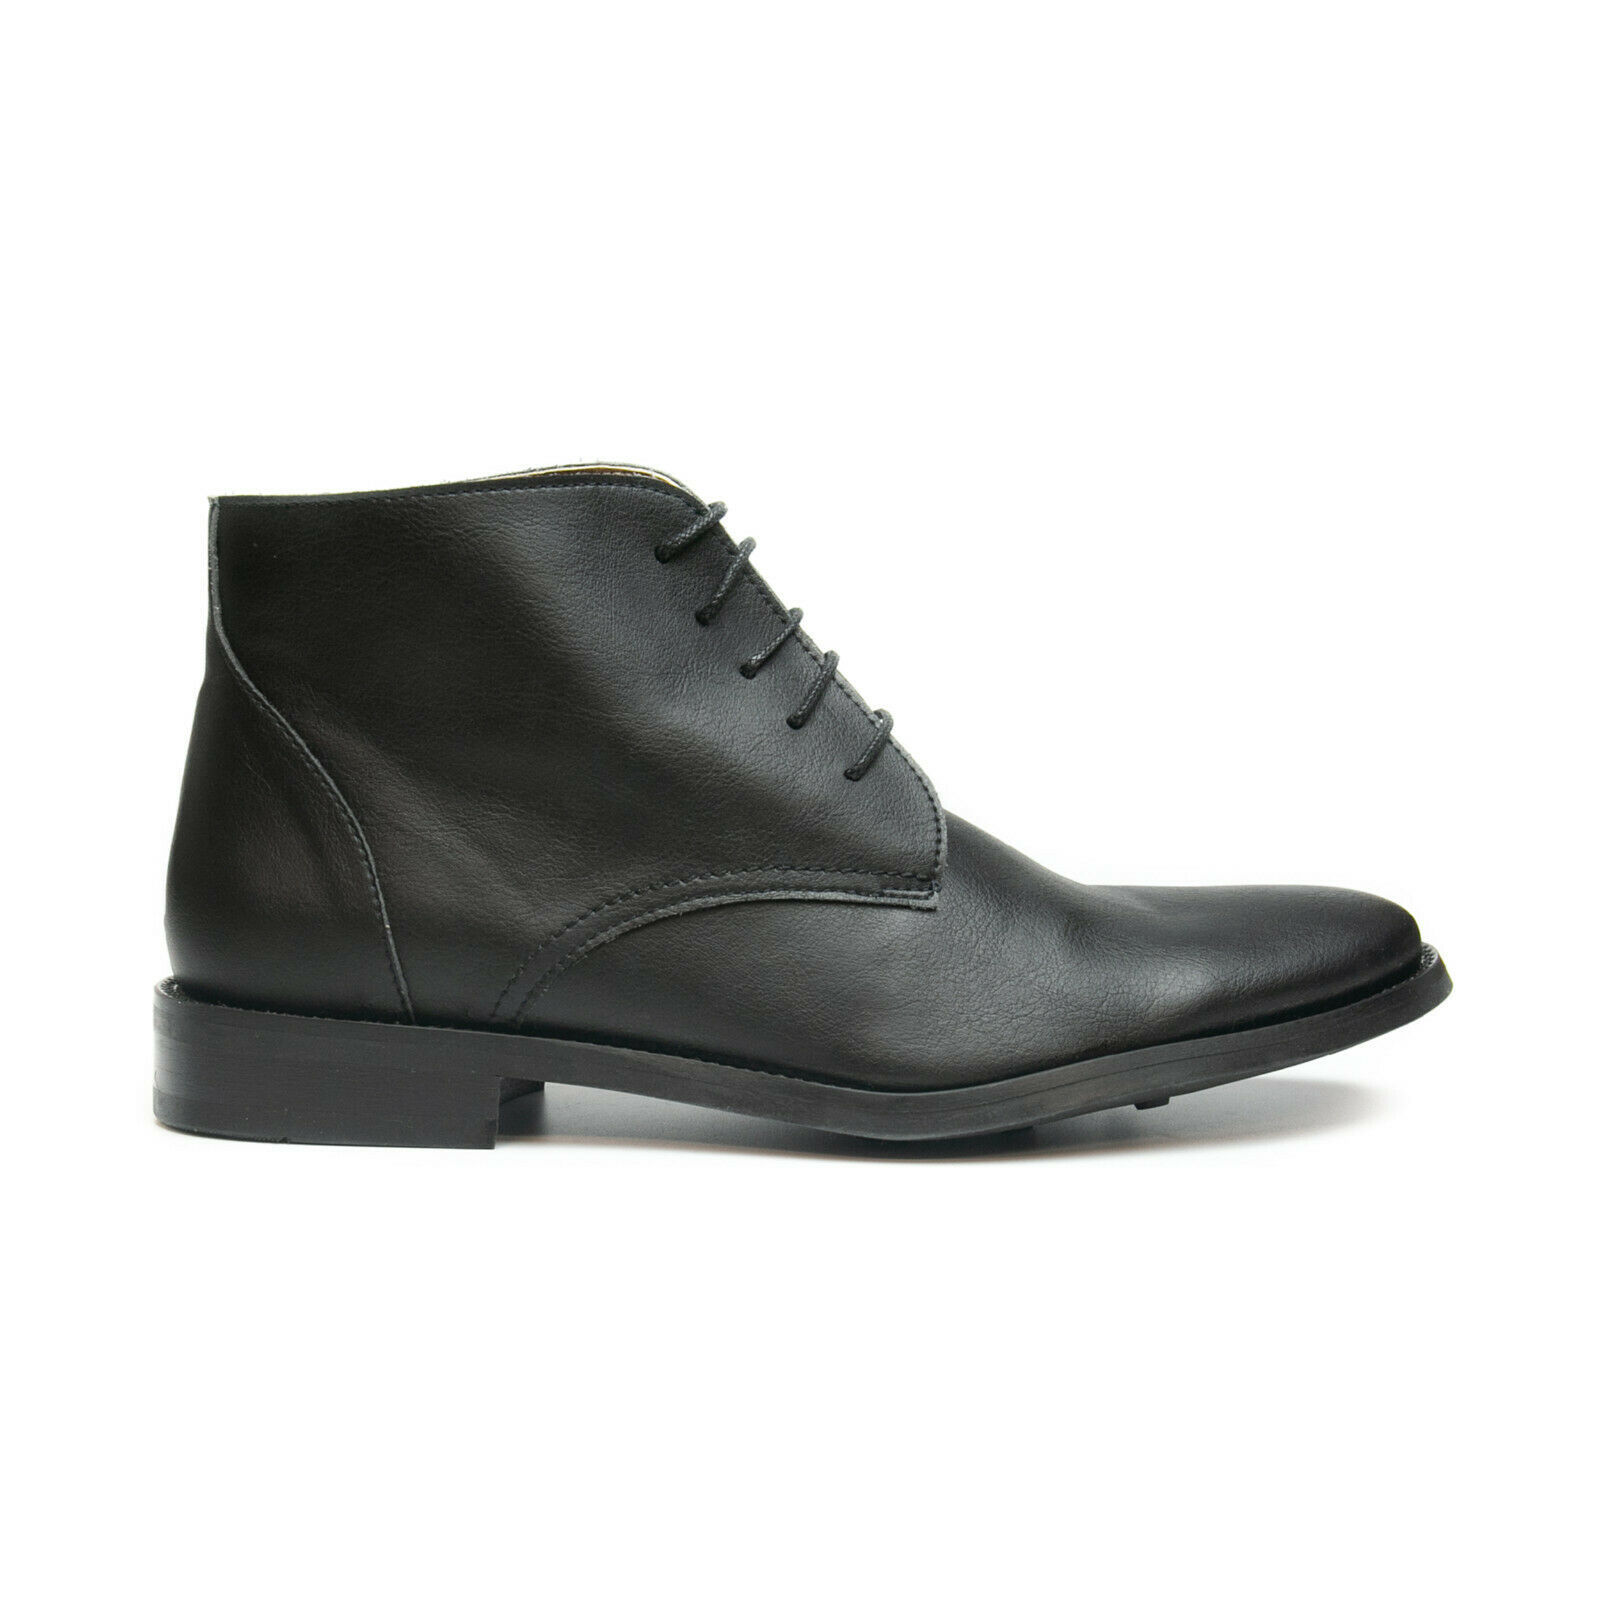 Booty Desert Chukka Formal Dress in Black vegan leather and breathable lining - $132.55